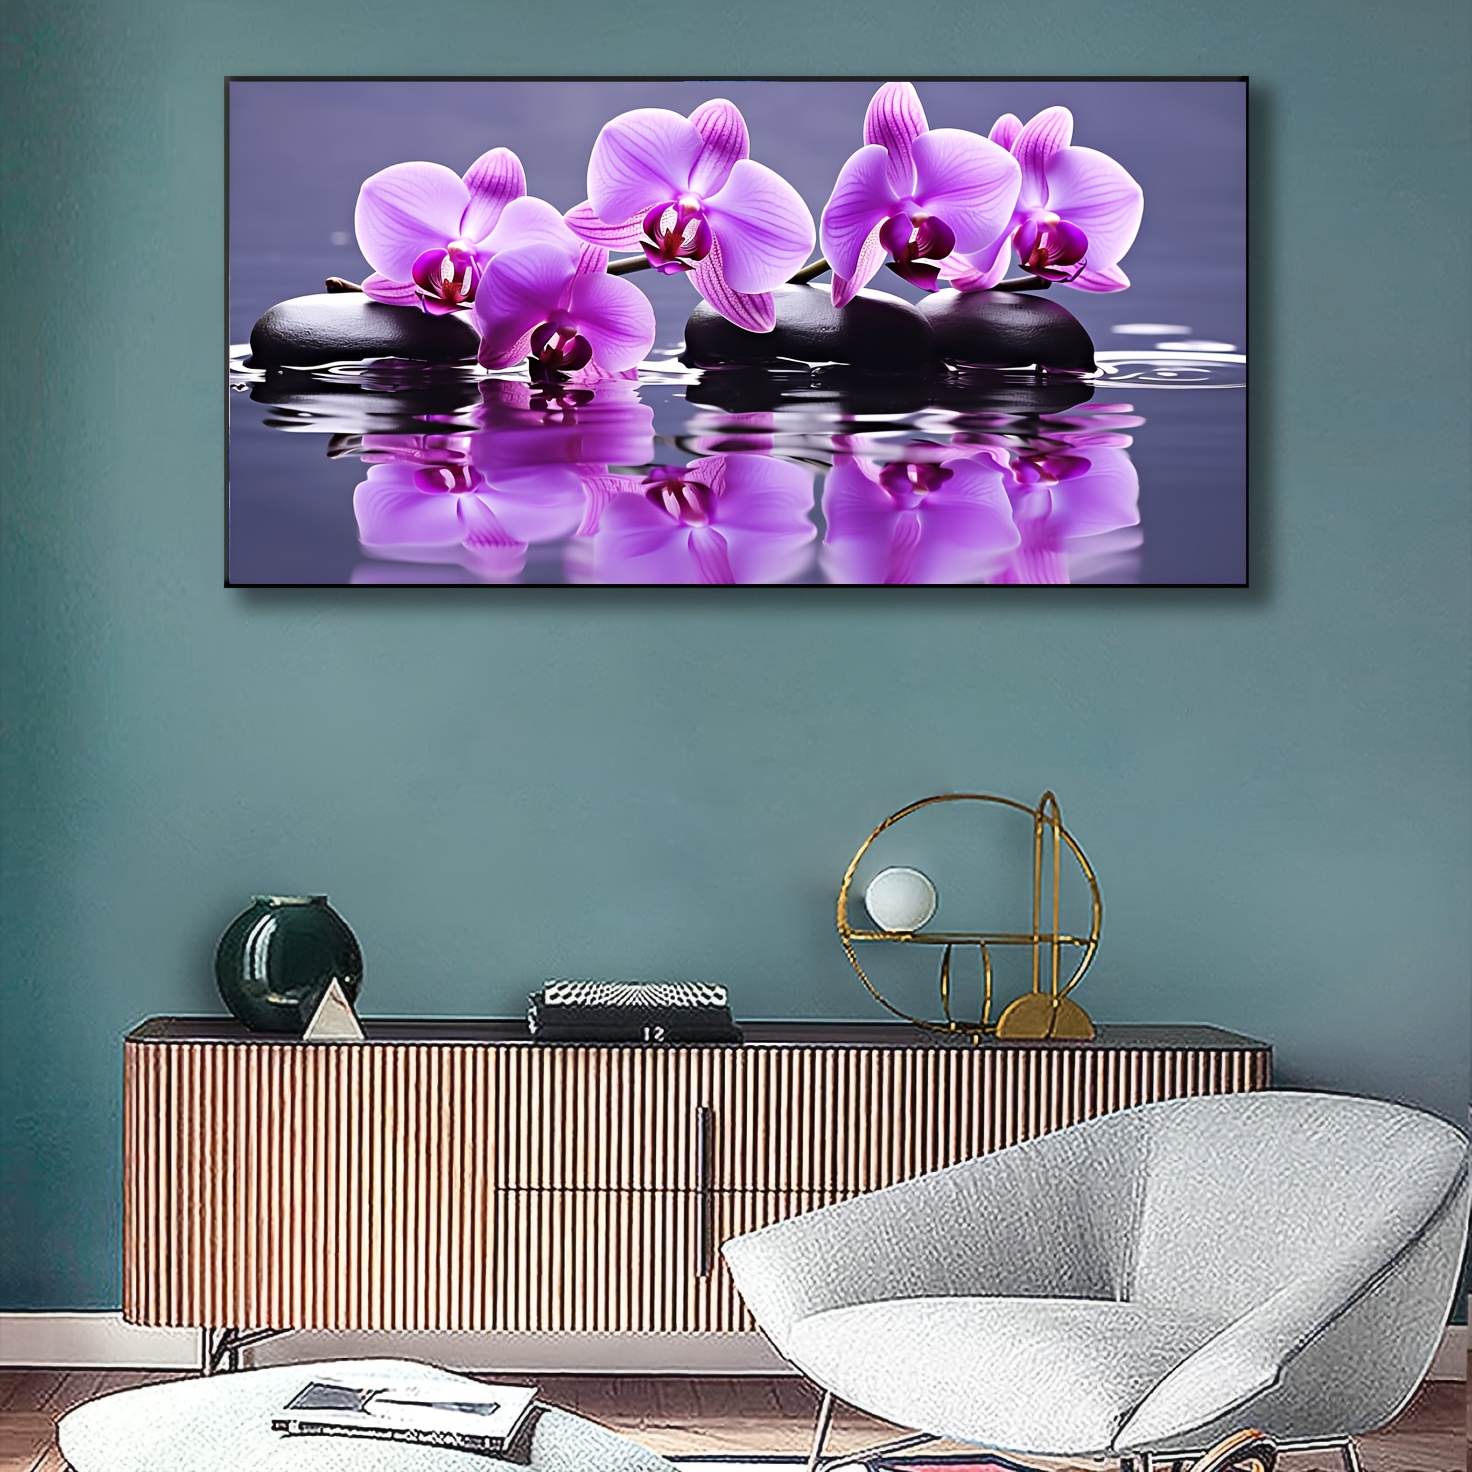 5D Diamond Painting Purple Orchid Candles by Bamboo Kit